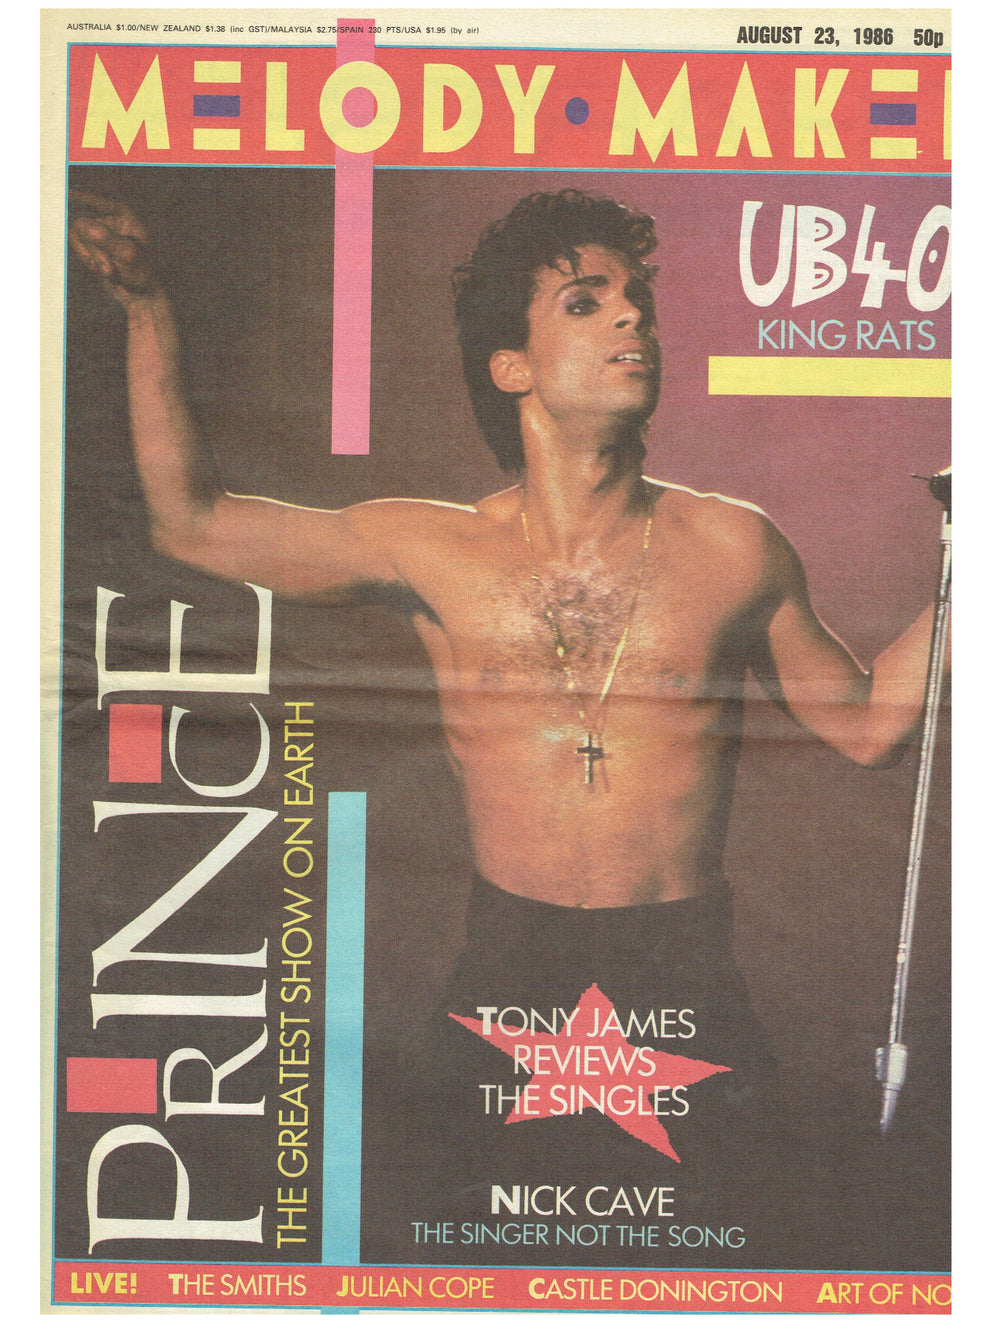 Prince – Greatest Show Full Newspaper Melody Maker August 23rd 1986